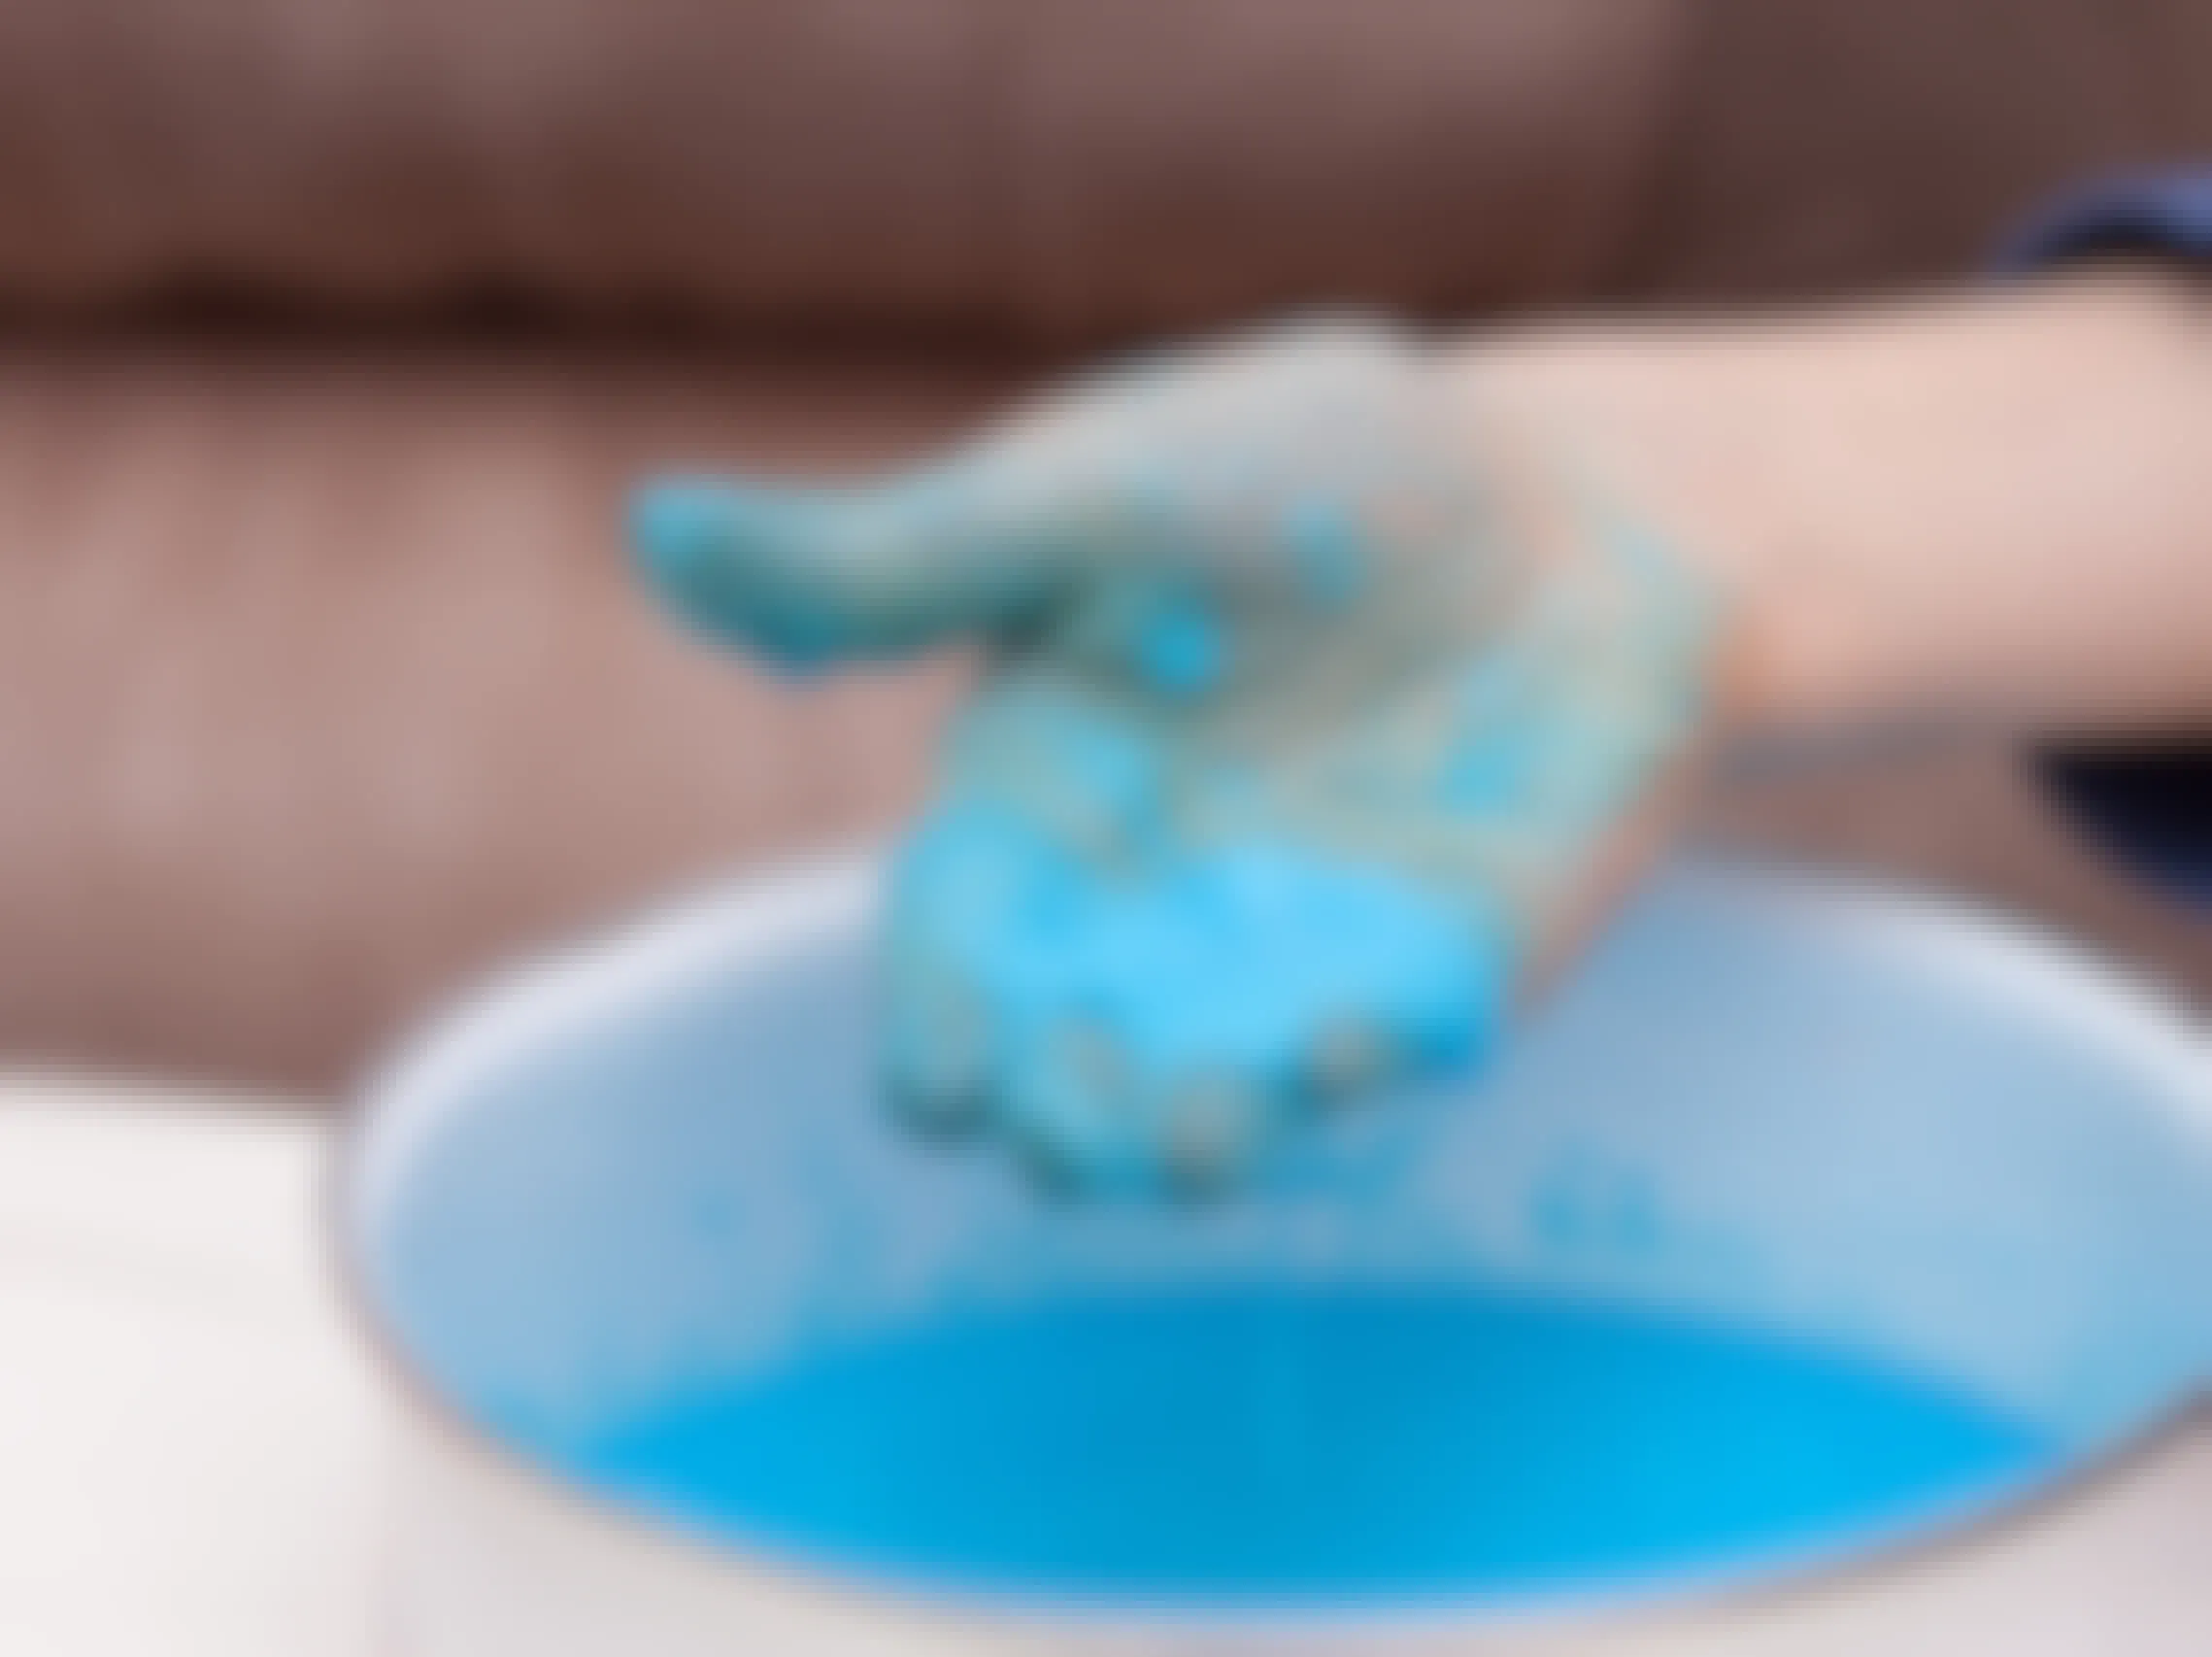 A childs hand holding some cornstarch and water mixture that has been dyed blue over a bowl of the mixture